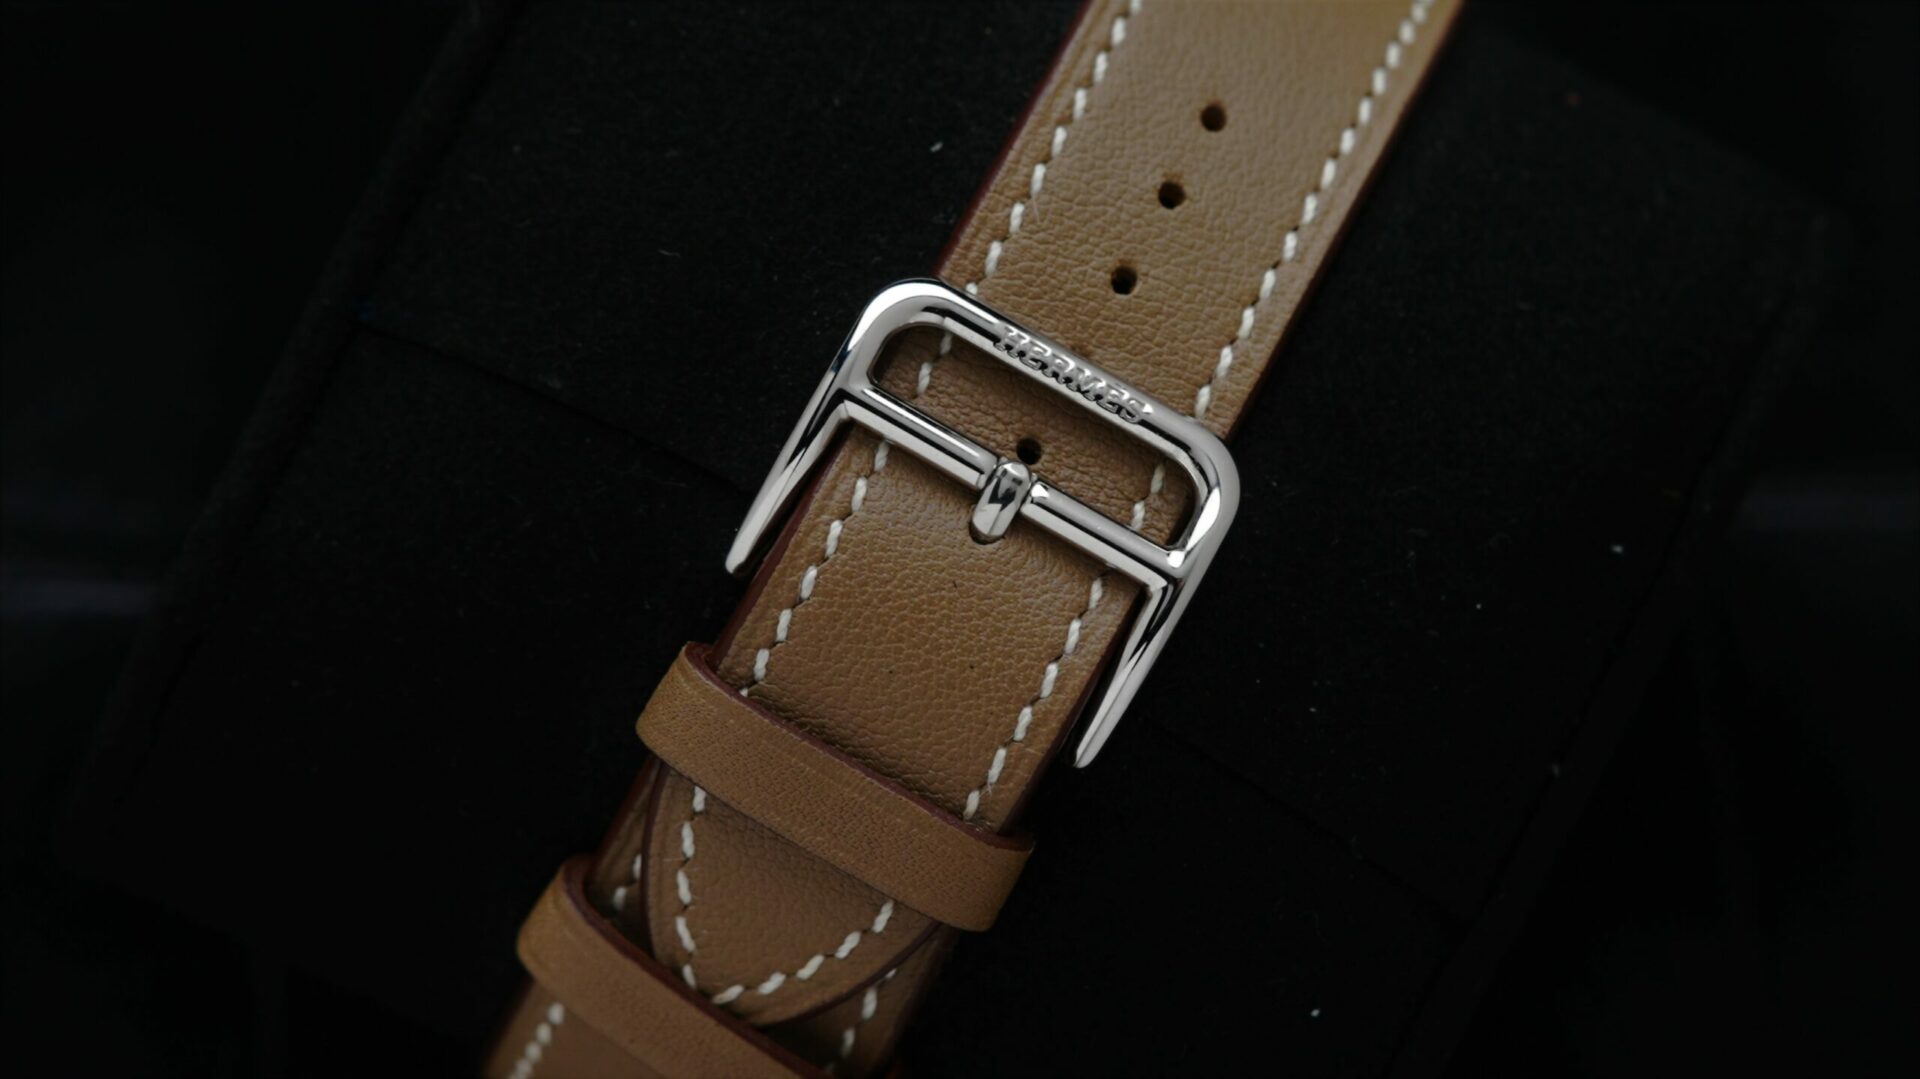 Strap and buckle on the Franck Muller Vintage Curvex 7 Day Reserve watch.